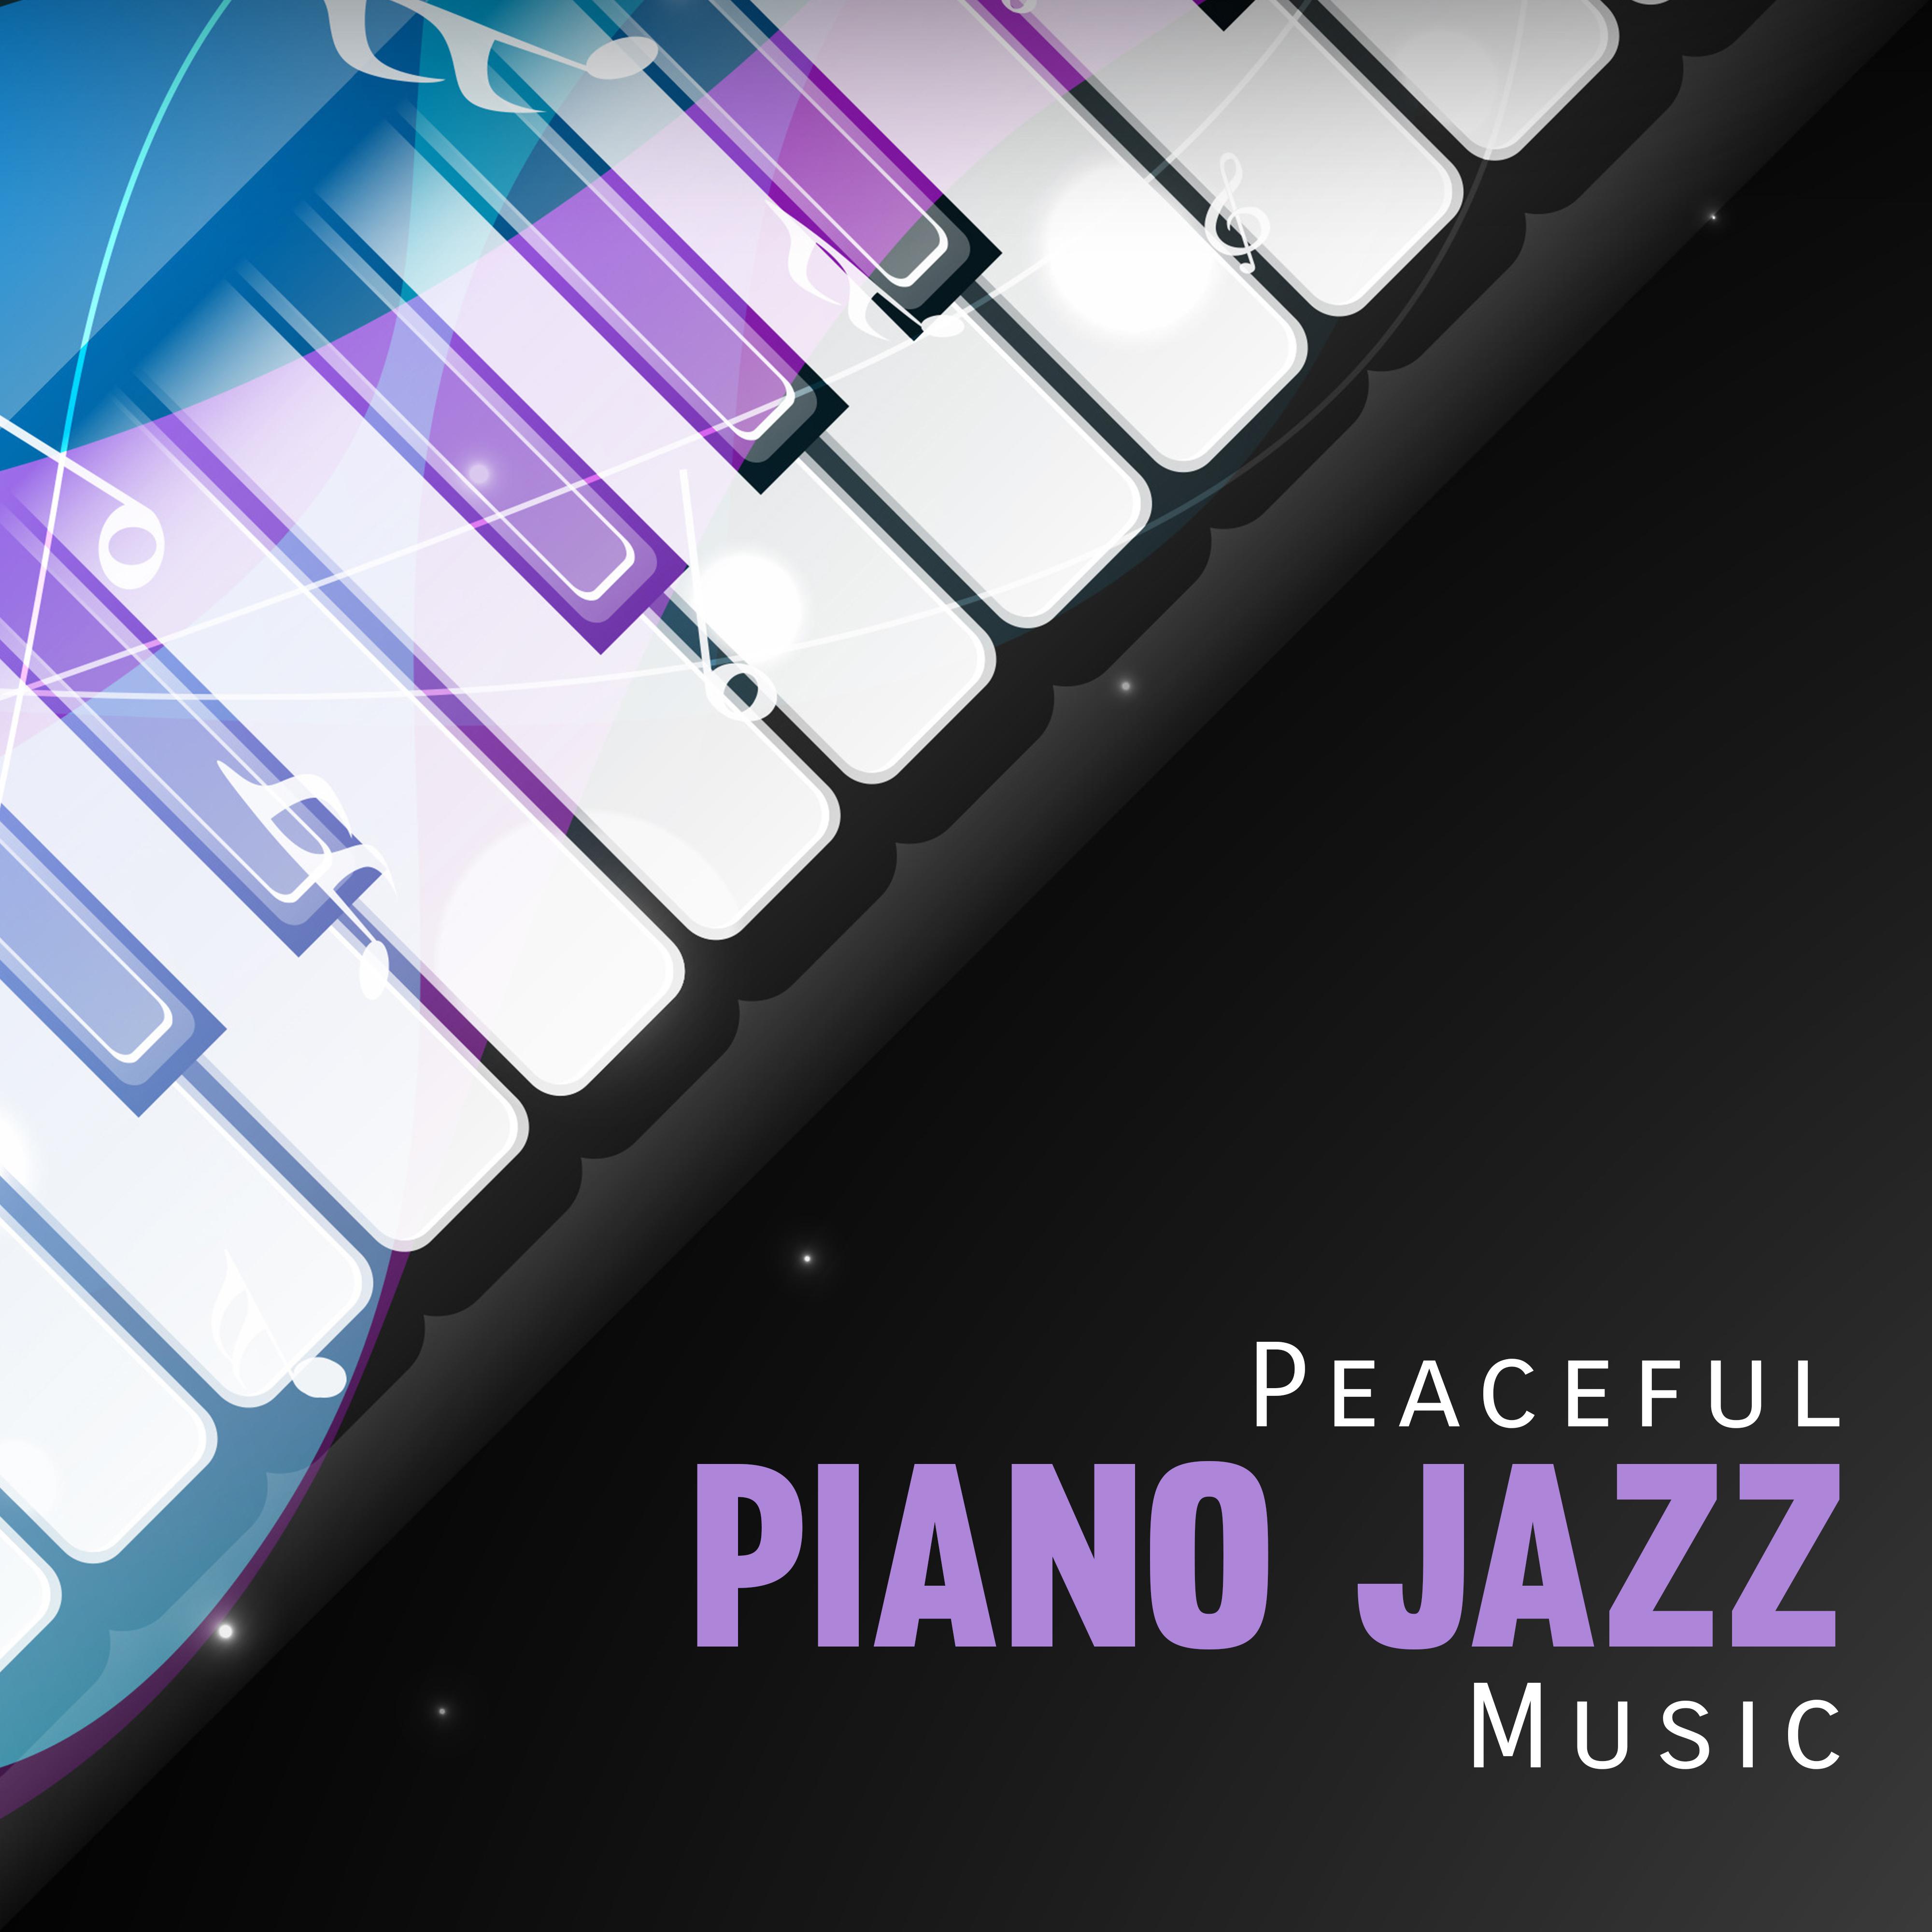 Peaceful Piano Jazz Music  Jazz Instrumental, Calm Down, Perfect Rest, Soothing Sounds of Piano to Relax, Smooth Jazz